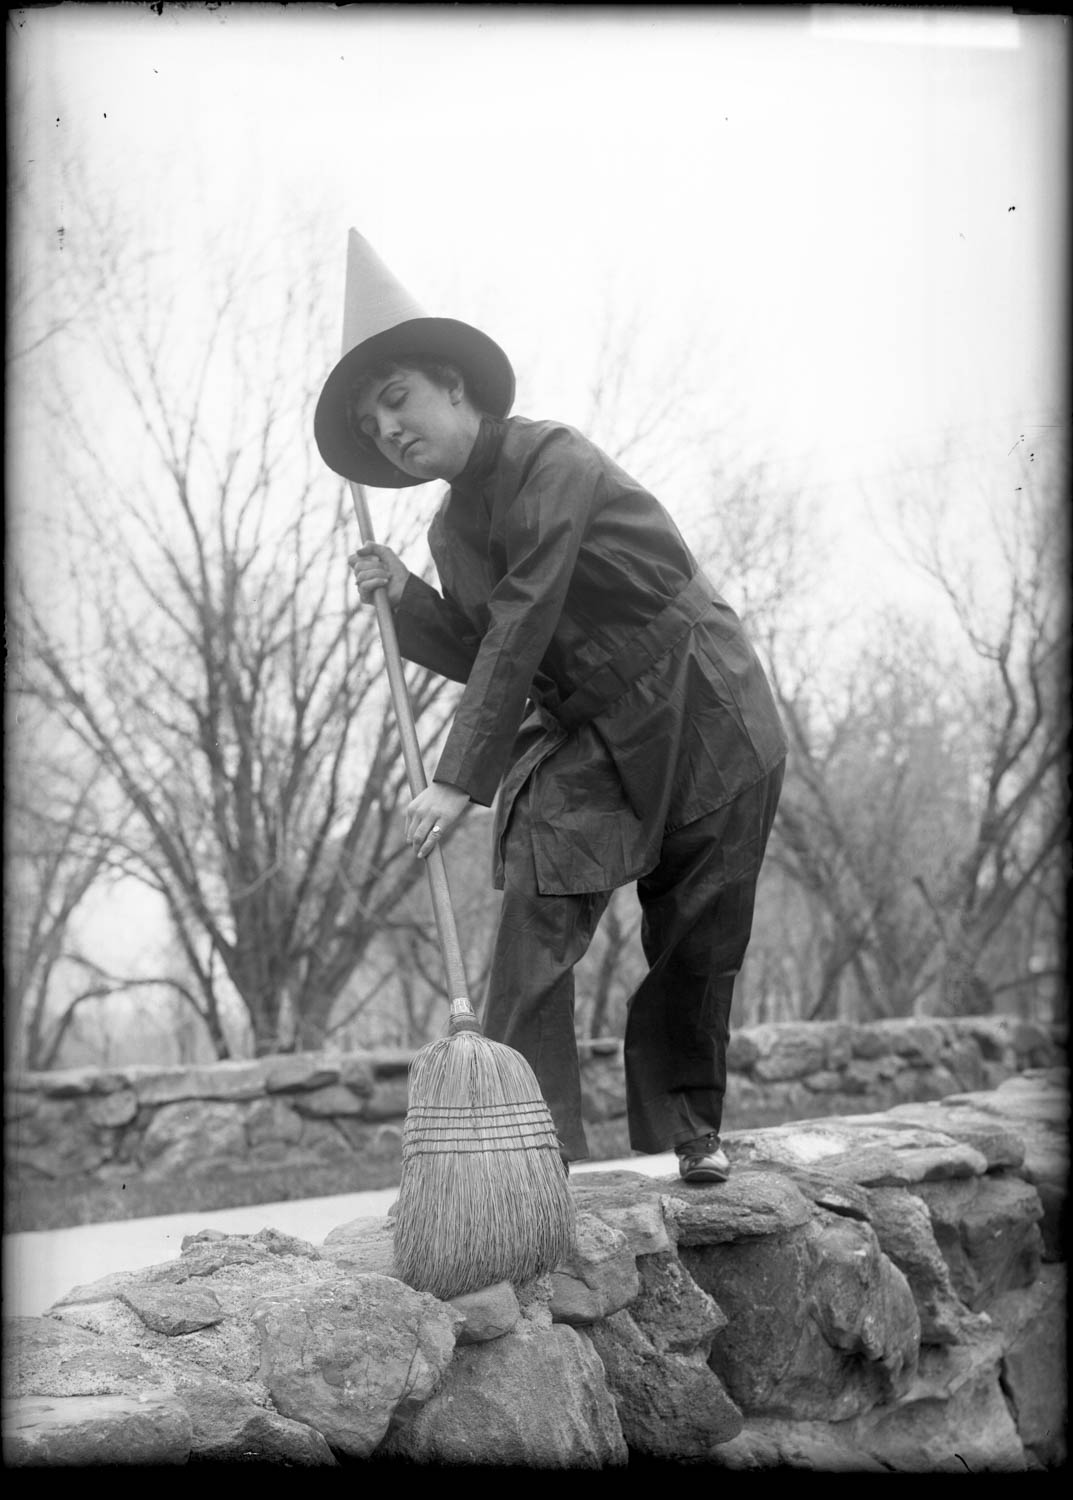 A woman dressed as a witch and holding a wicker broom in a vintage Halloween photograph.